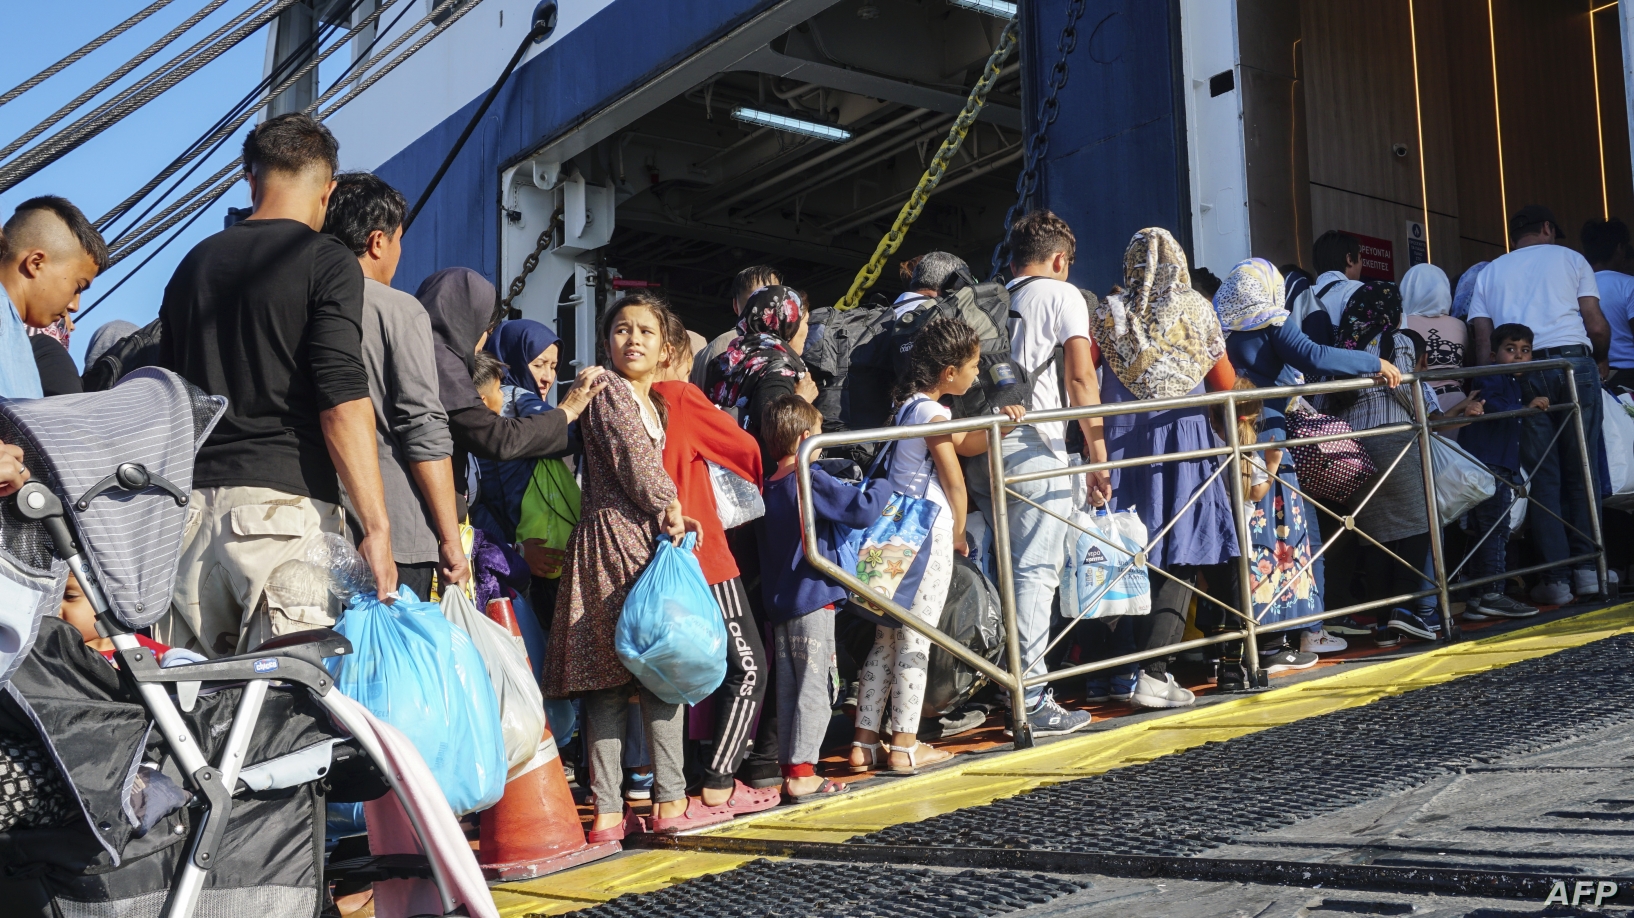 Greece Transfers 570 Migrants from Overcrowded Camp